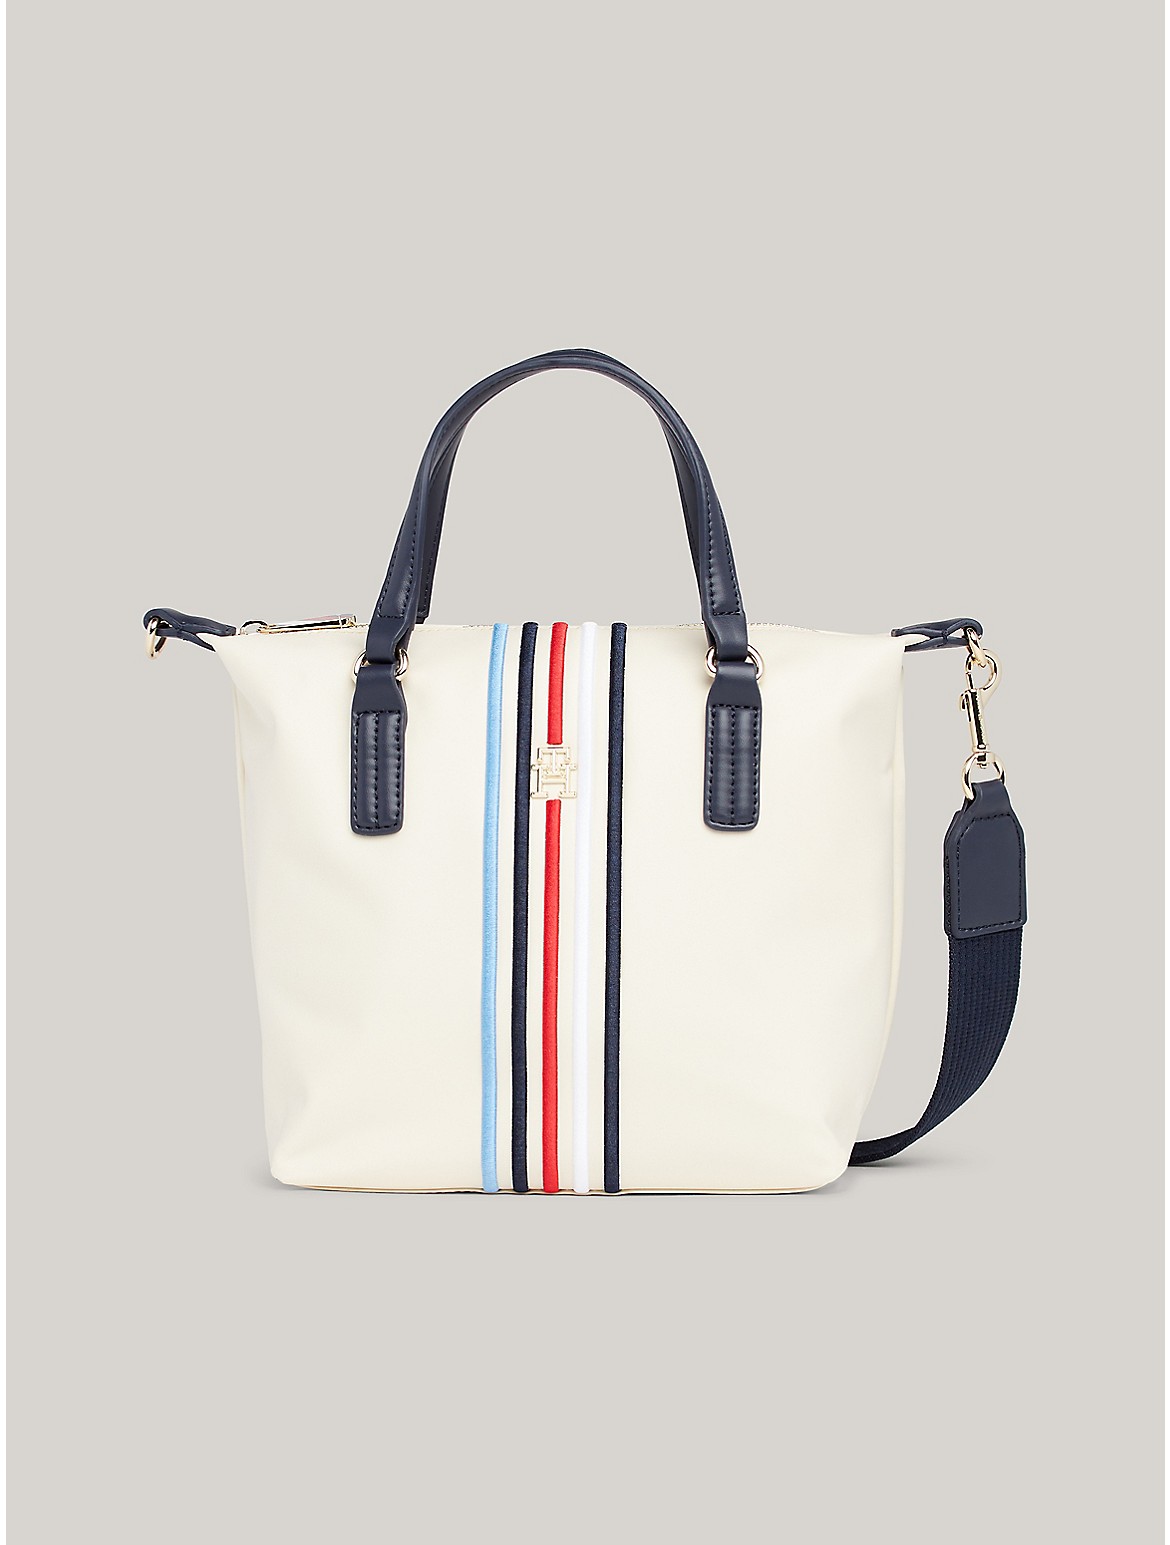 Tommy Hilfiger Women's TH Stripe Small Tote